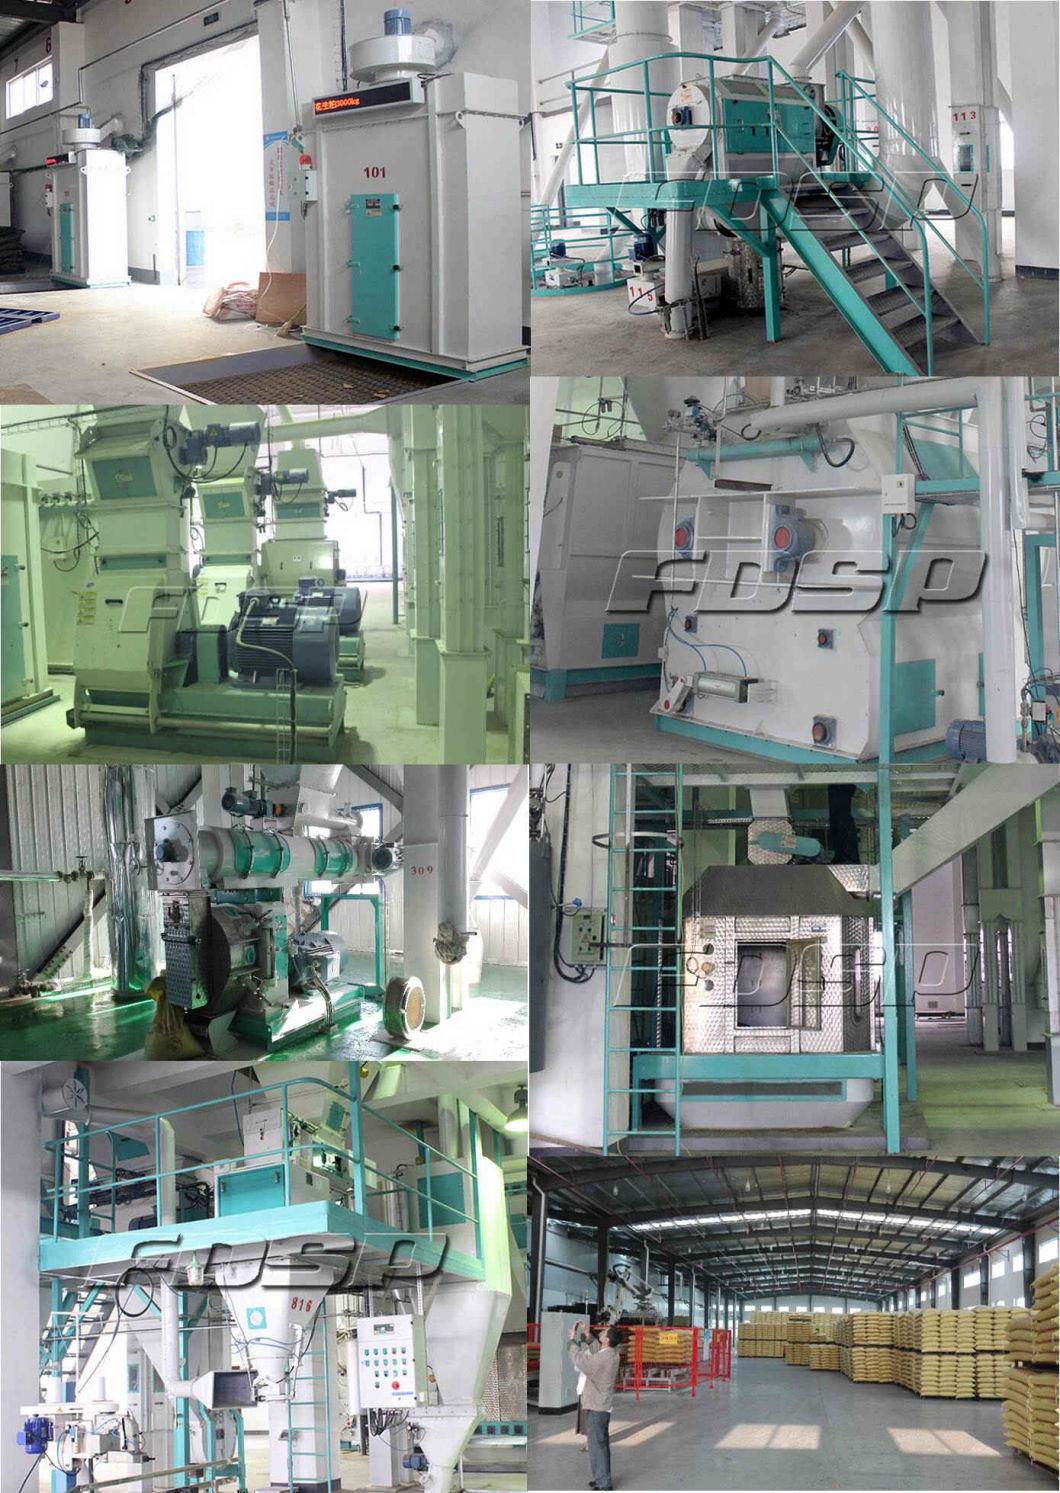 Poultry Feed Processing Plant Small Feed Pellets Production Line